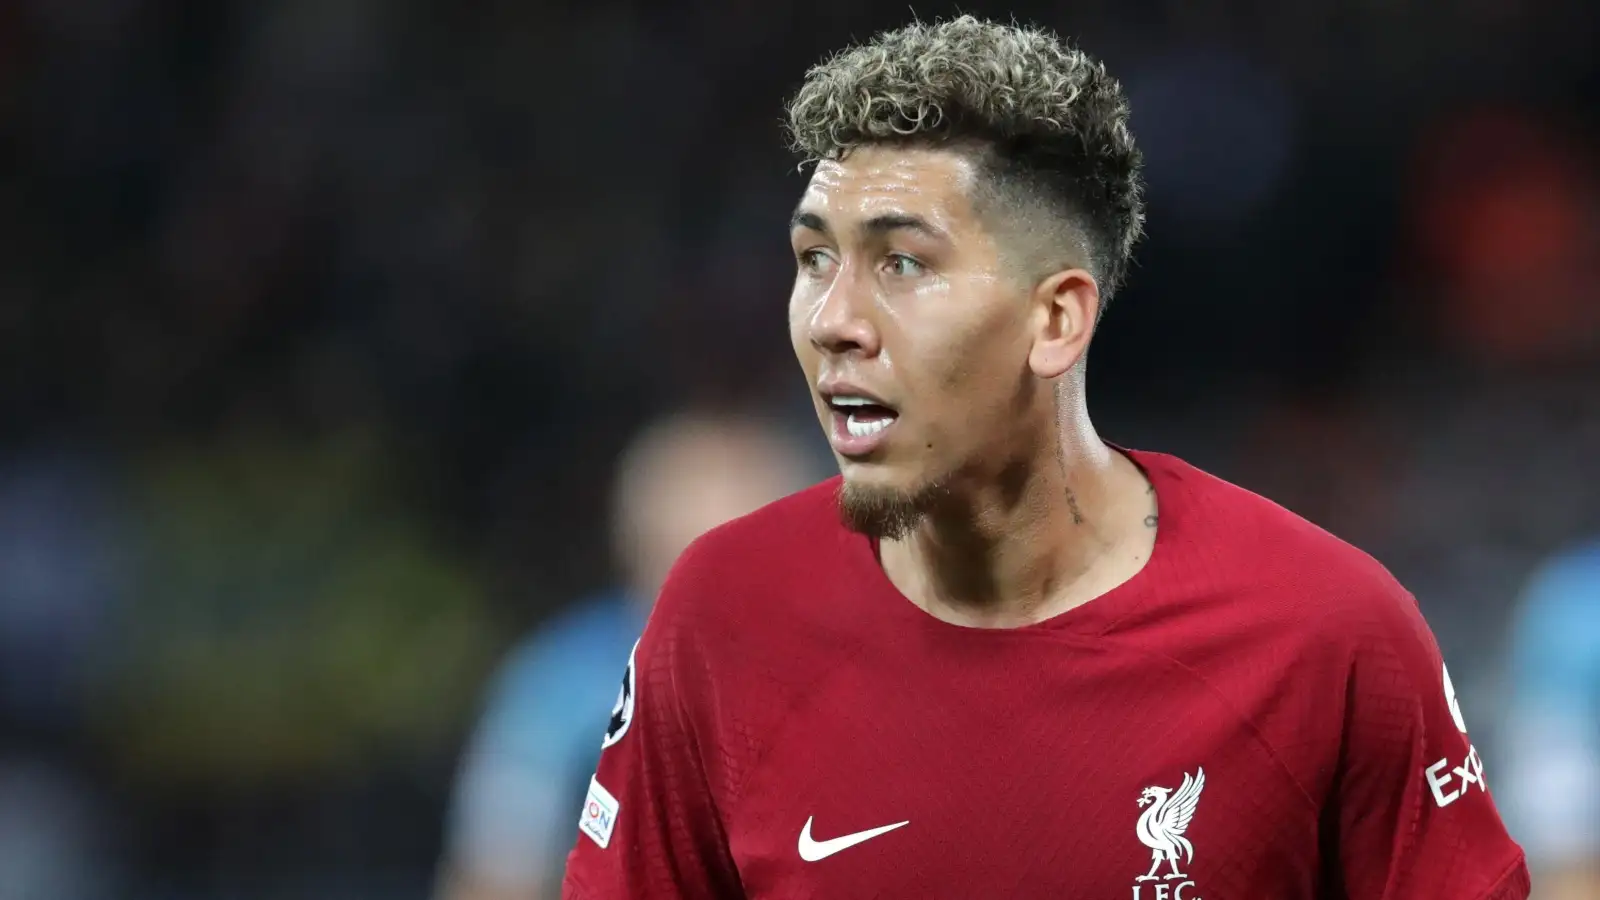 Comparing Roberto Firmino’s 22-23 stats to Brazil’s WC forwards